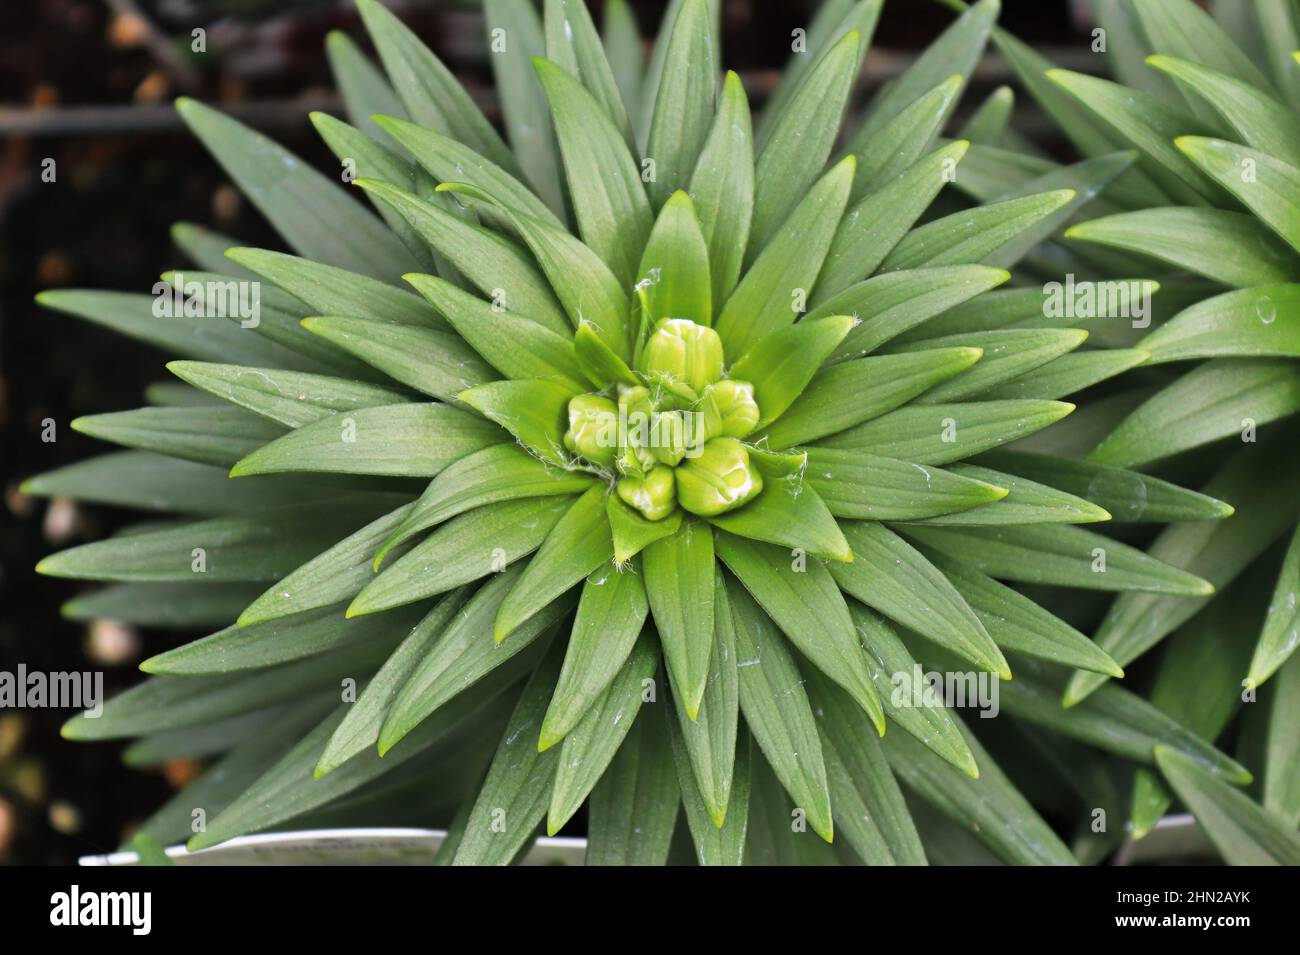 The green spiky foliage on lily plants Stock Photo